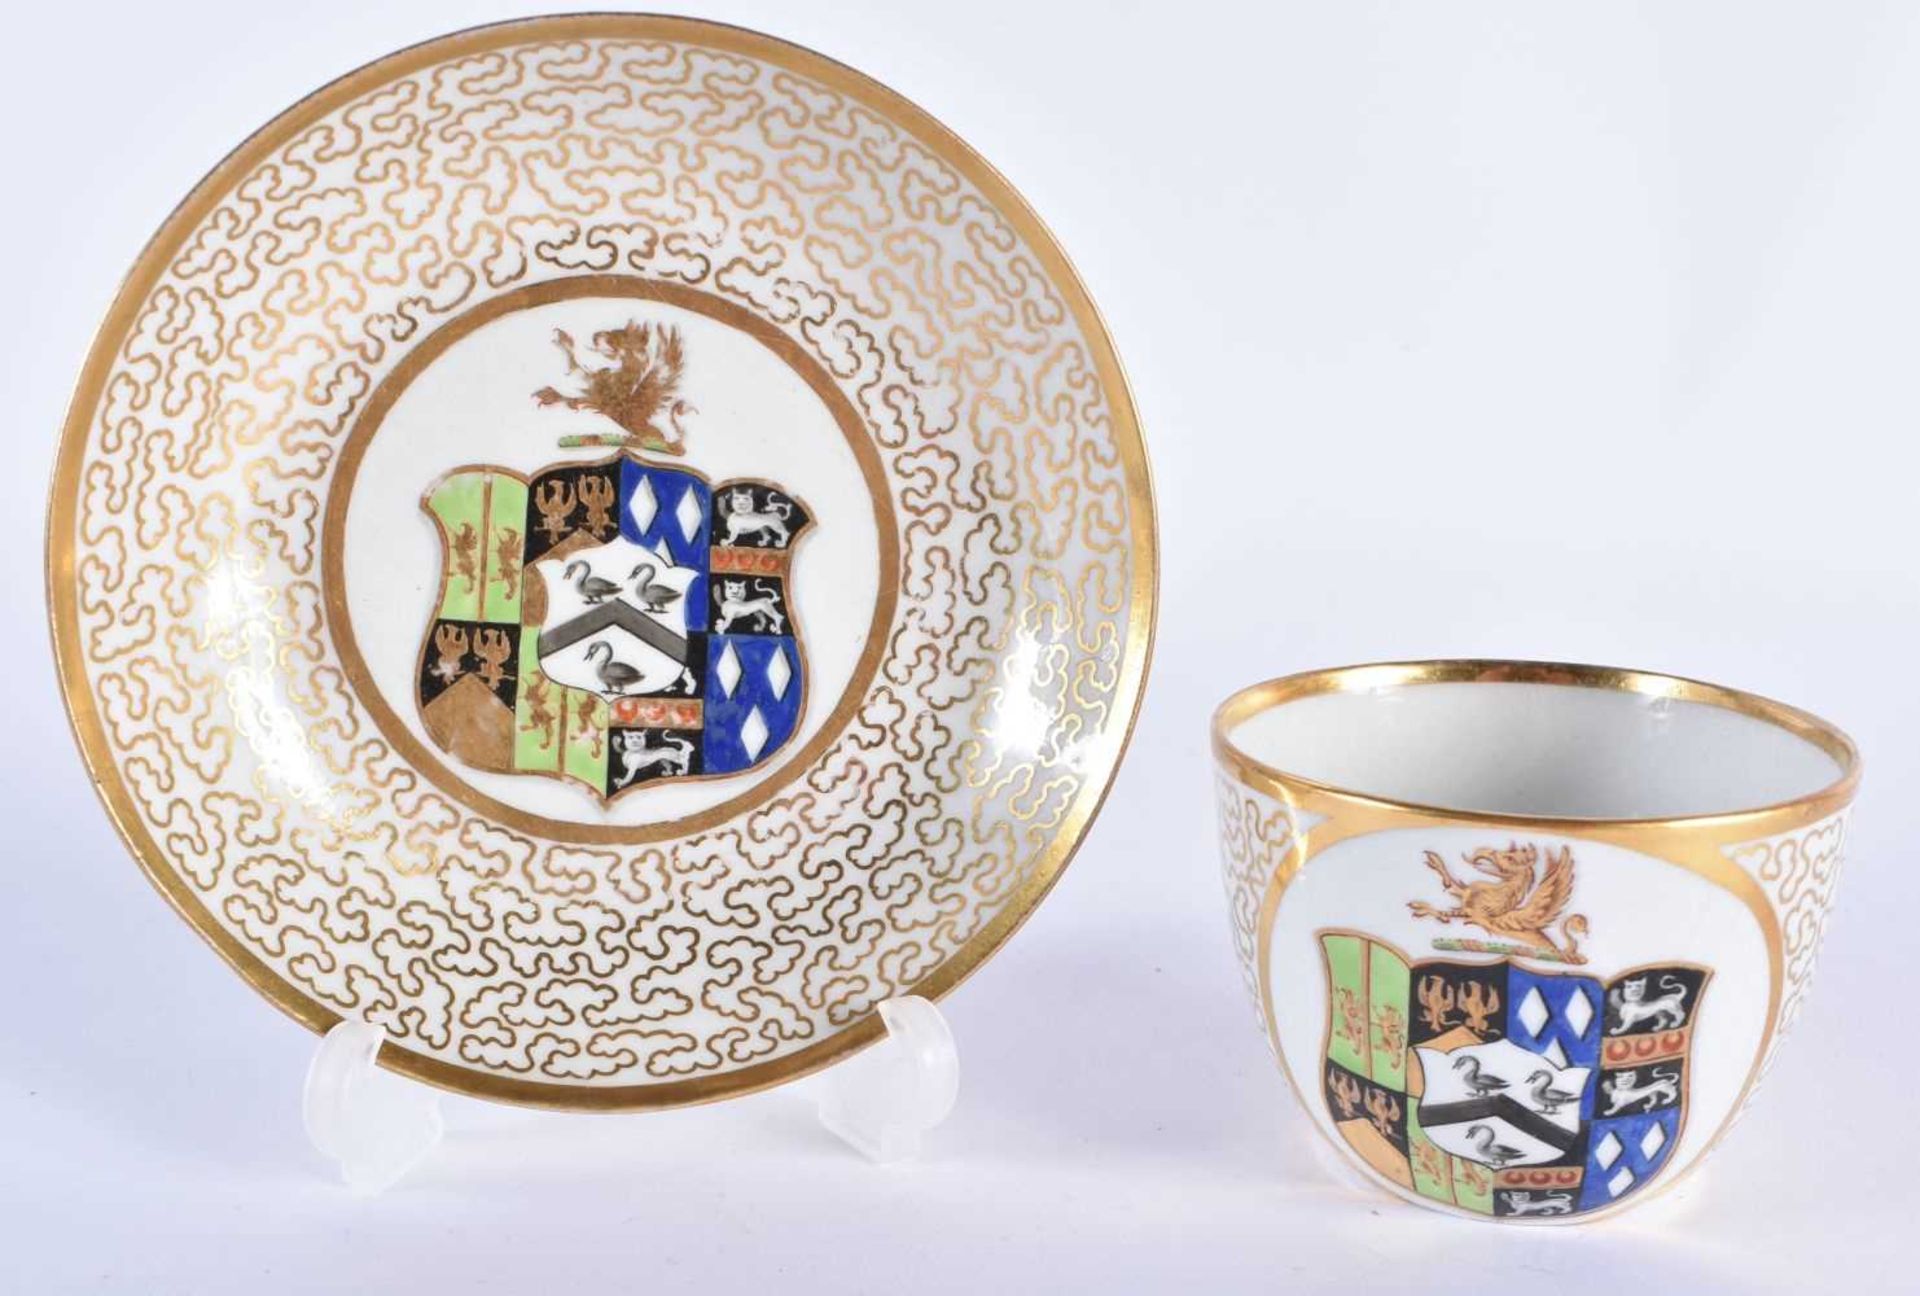 THREE EARLY 19TH CENTURY CHAMBERLAINS WORCESTER PORCELAIN CUPS AND SAUCERS painted with armorials - Image 8 of 31